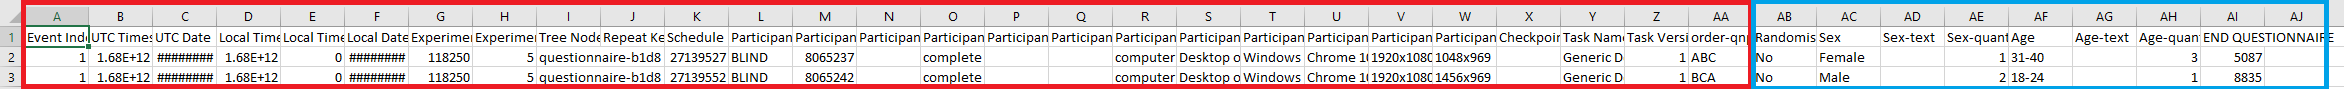 Screenshot of MS Excel, columns A-AA are highlighted in red, and columns AB-AJ are highlighted in blue.